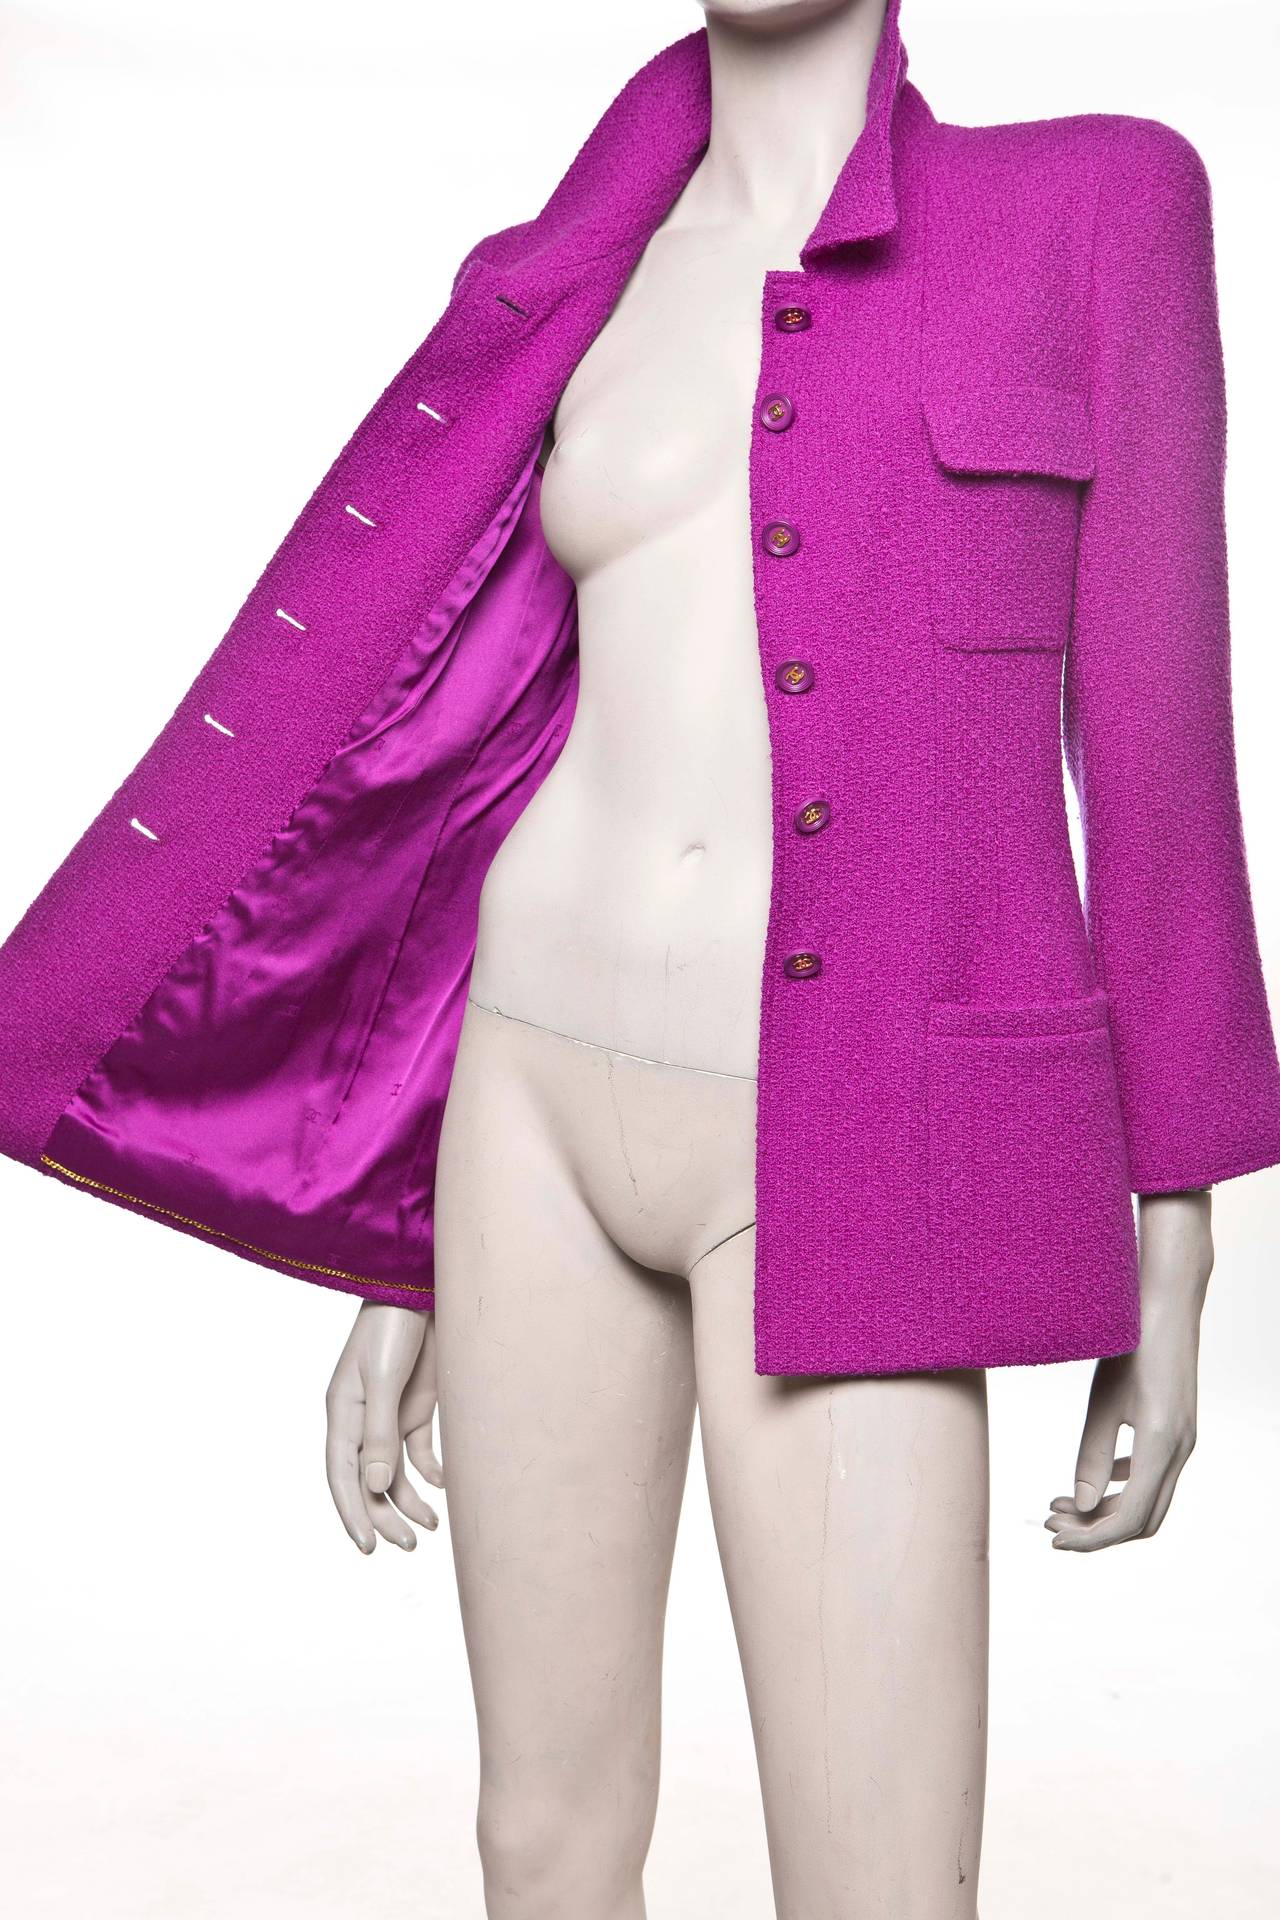 Chanel Violet Wool Crepe Button Front Jacket, Fall 1995 For Sale 4